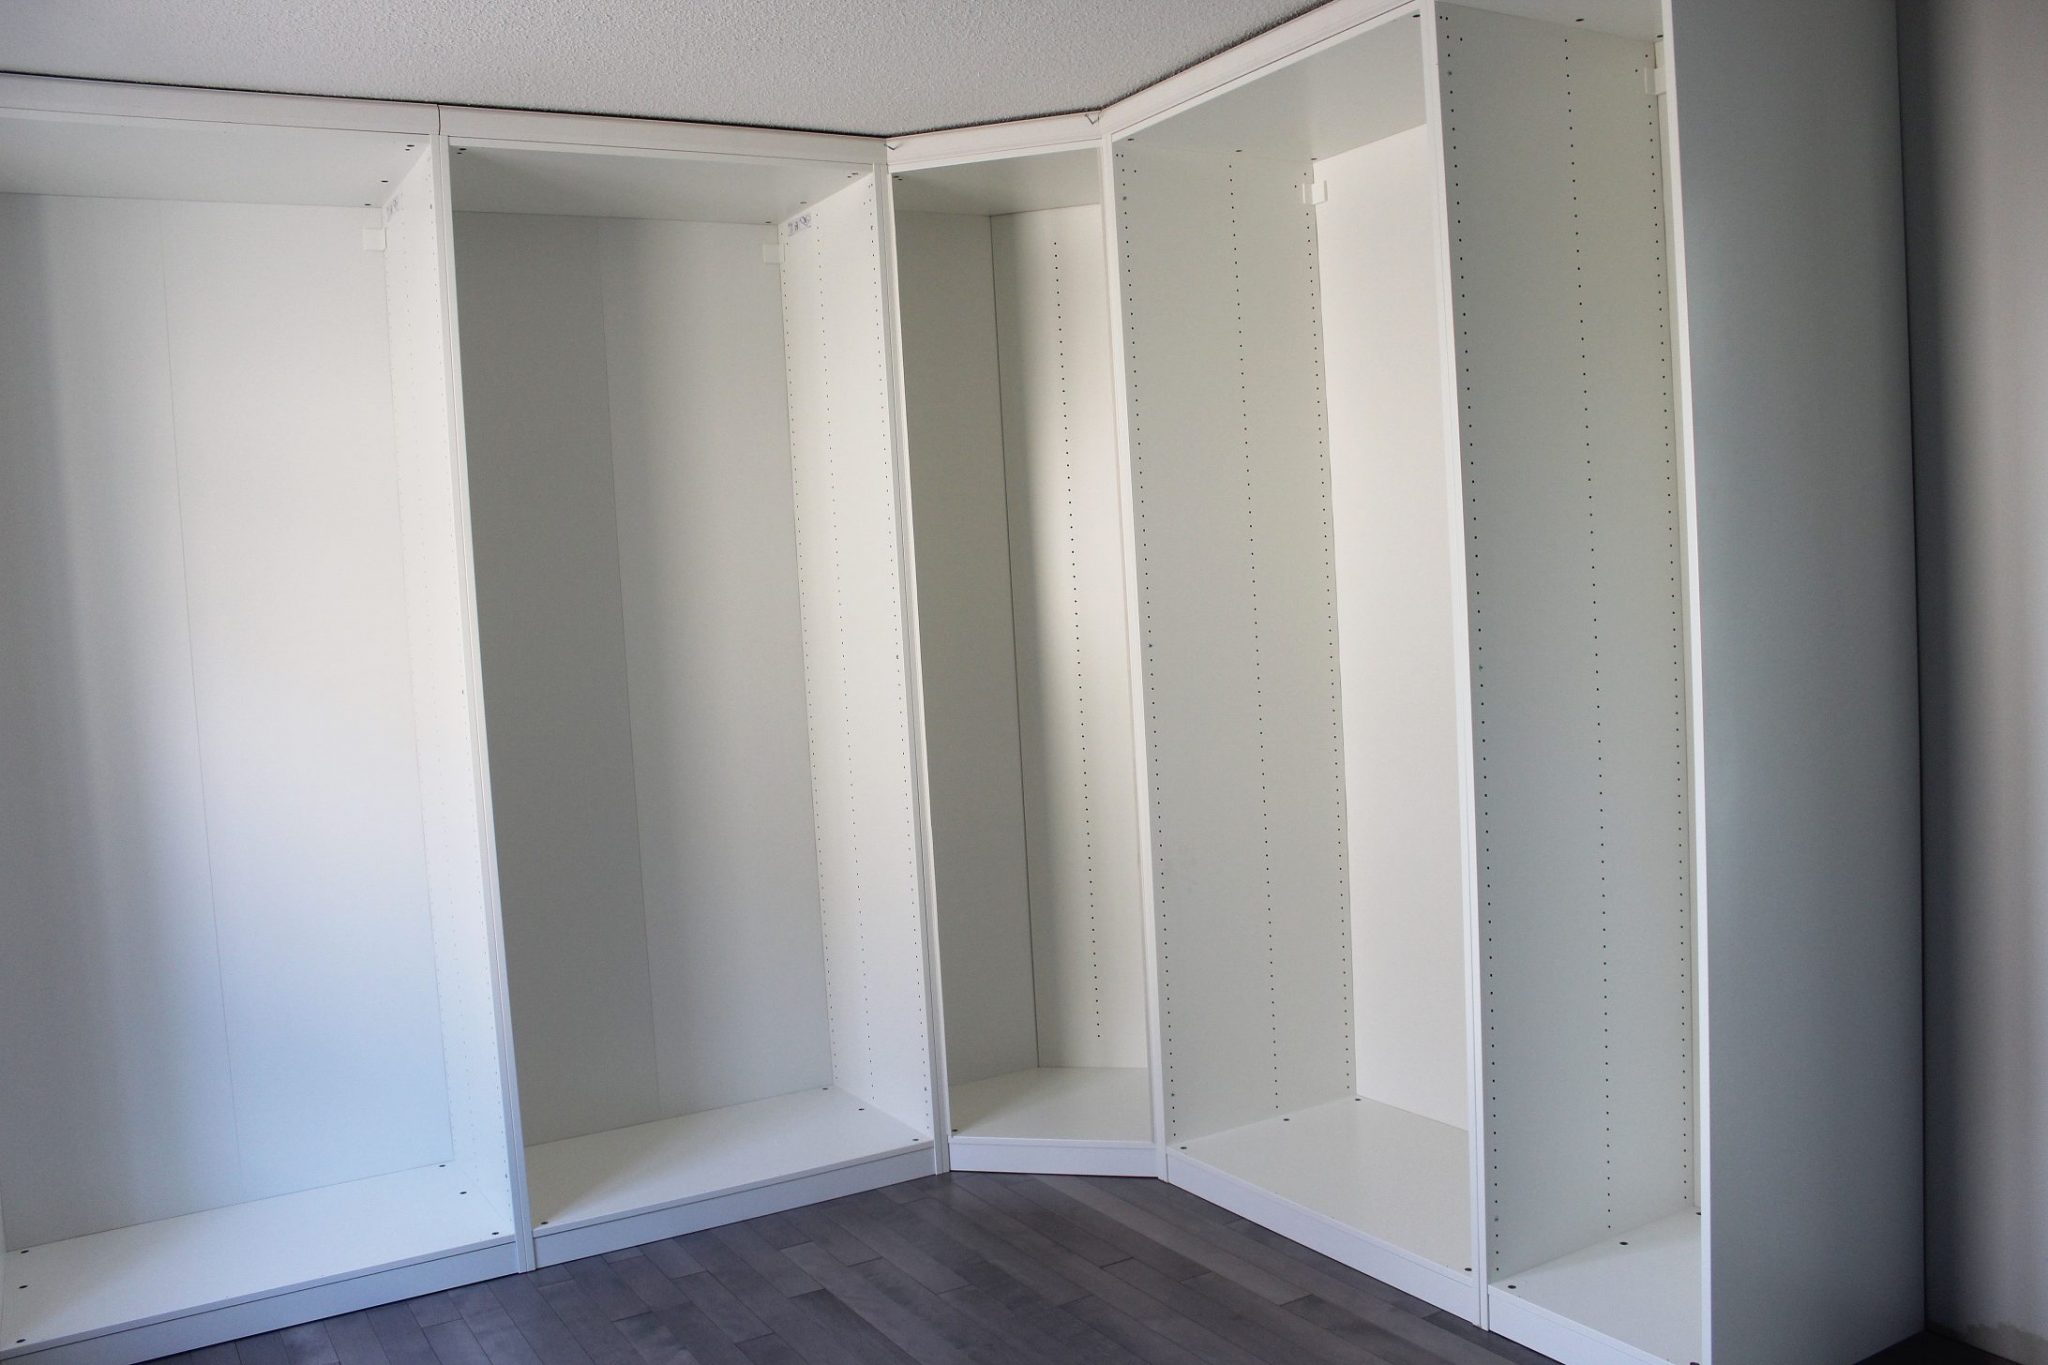 Last Closet Renovation Update - Almost Reveal Time!